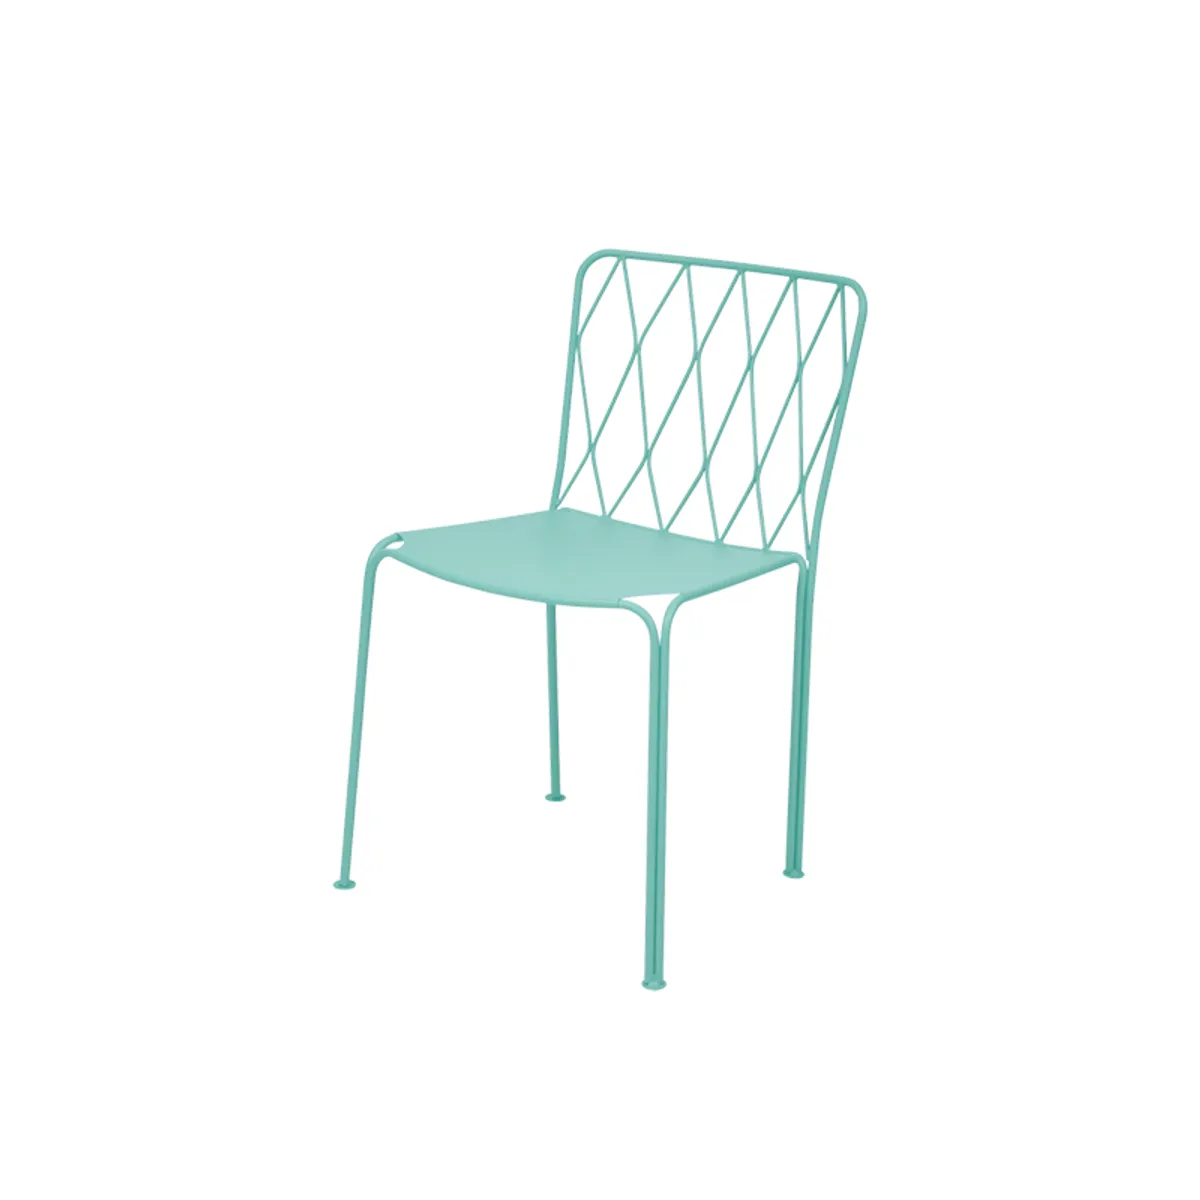 Kintbury Side Chair For Outdoors Bar And Cafe Furniture Blue